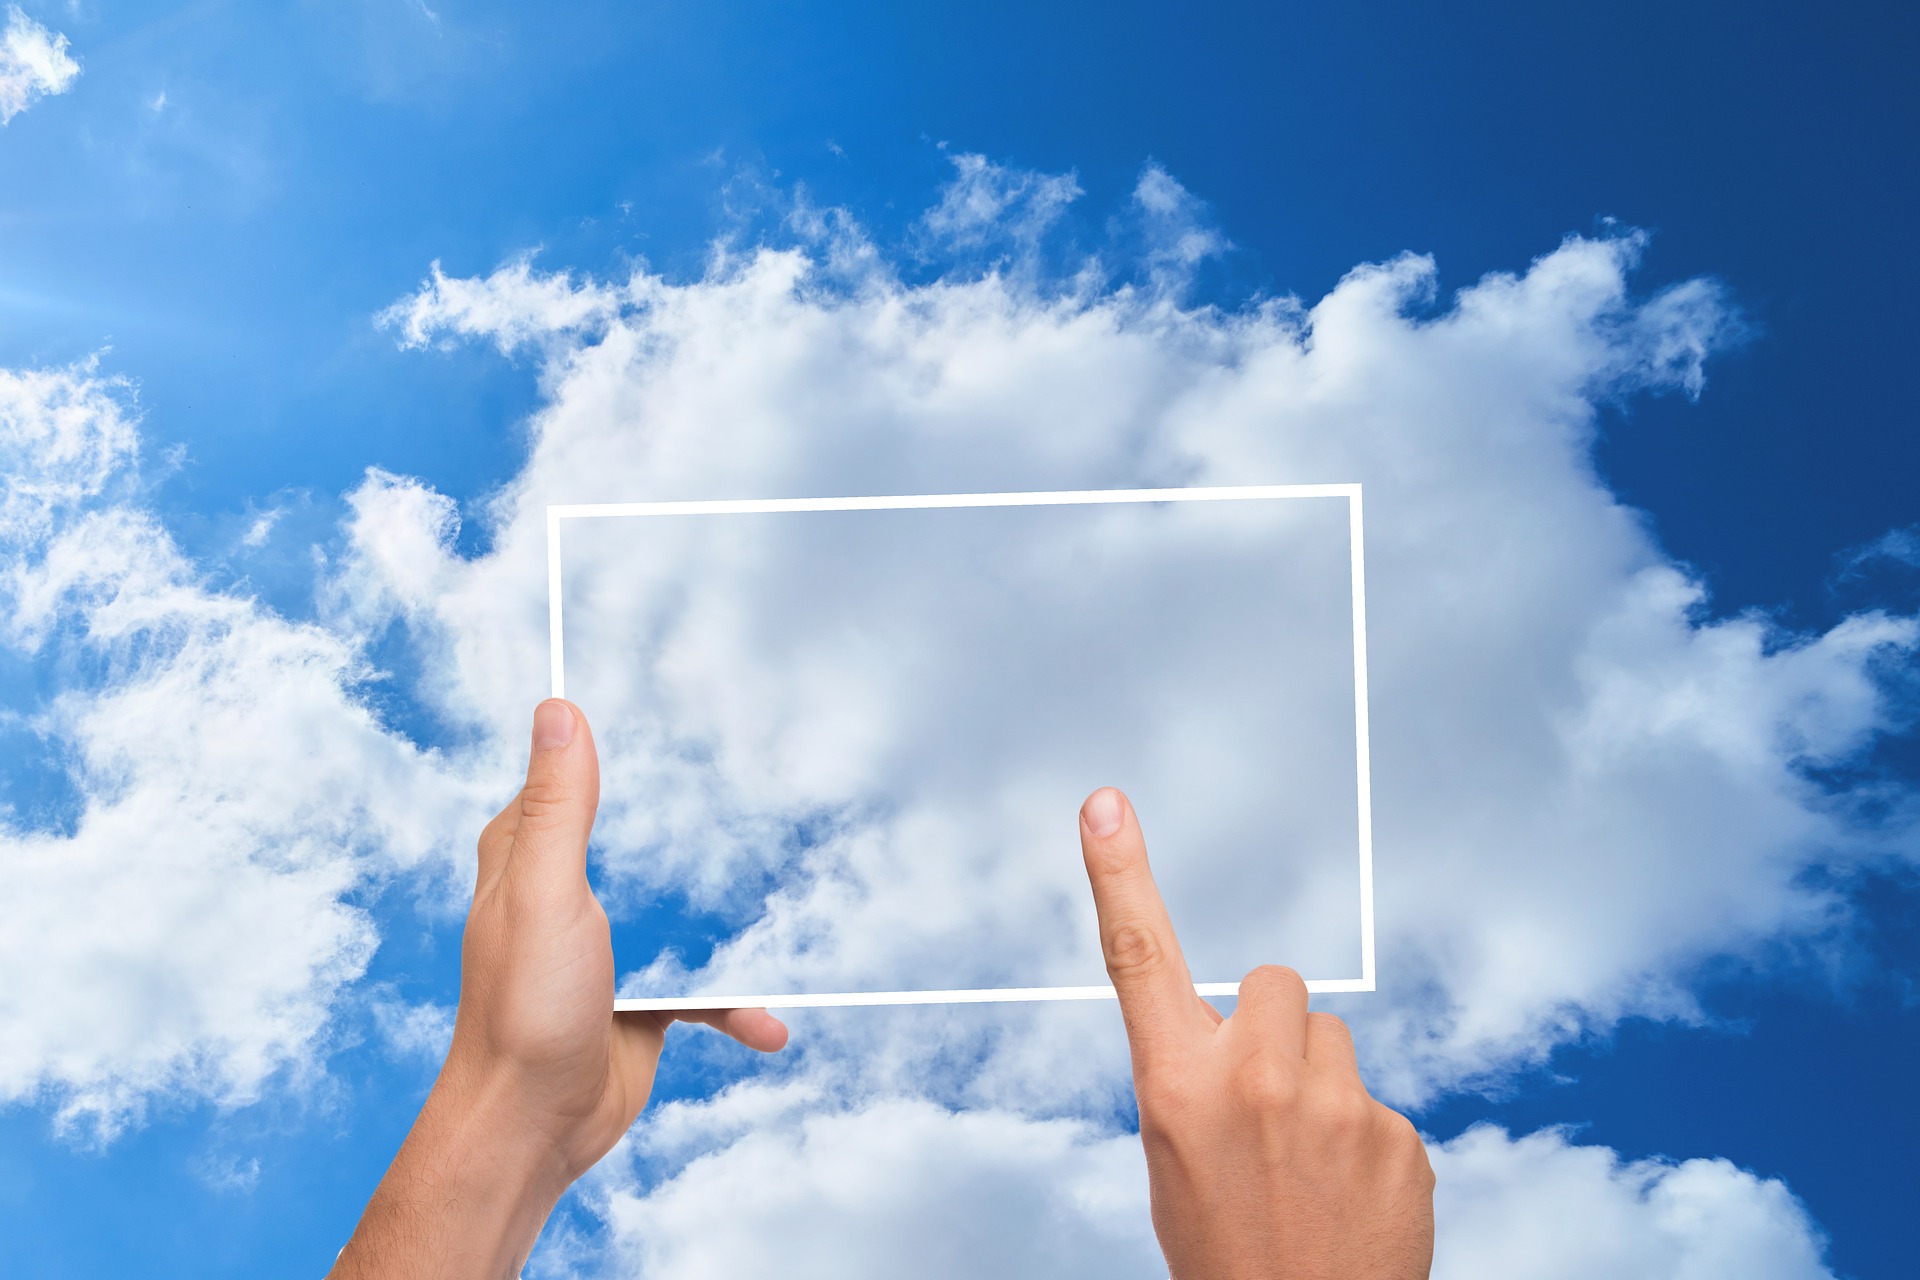 6 Cloud technology trends that will impact your business